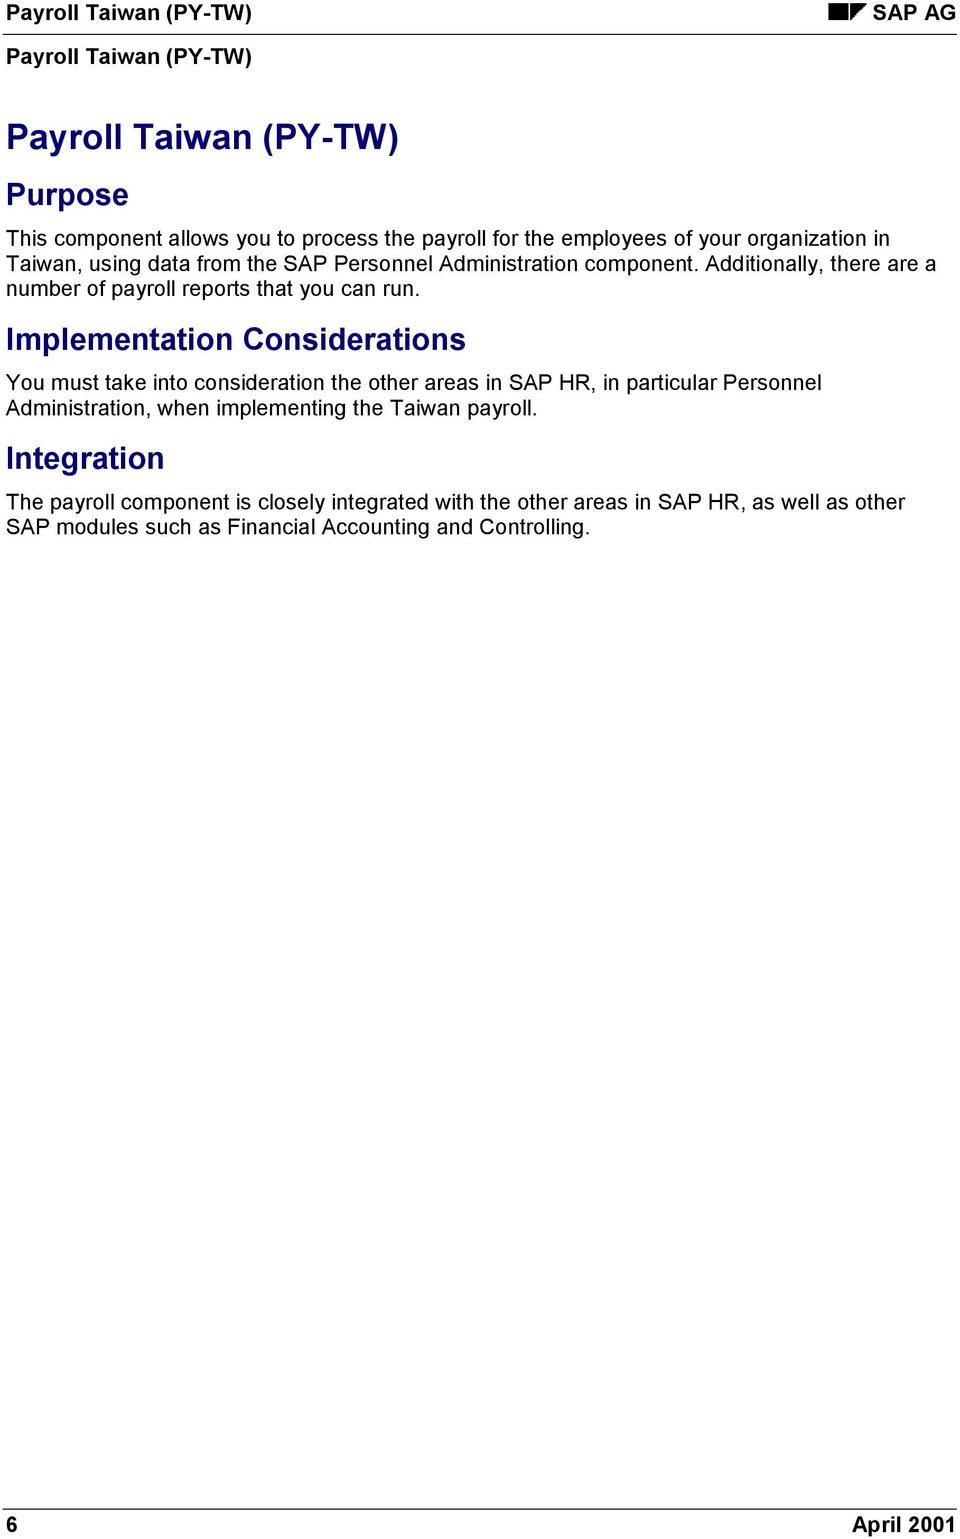 Implementation Considerations You must take into consideration the other areas in SAP HR, in particular Personnel Administration, when